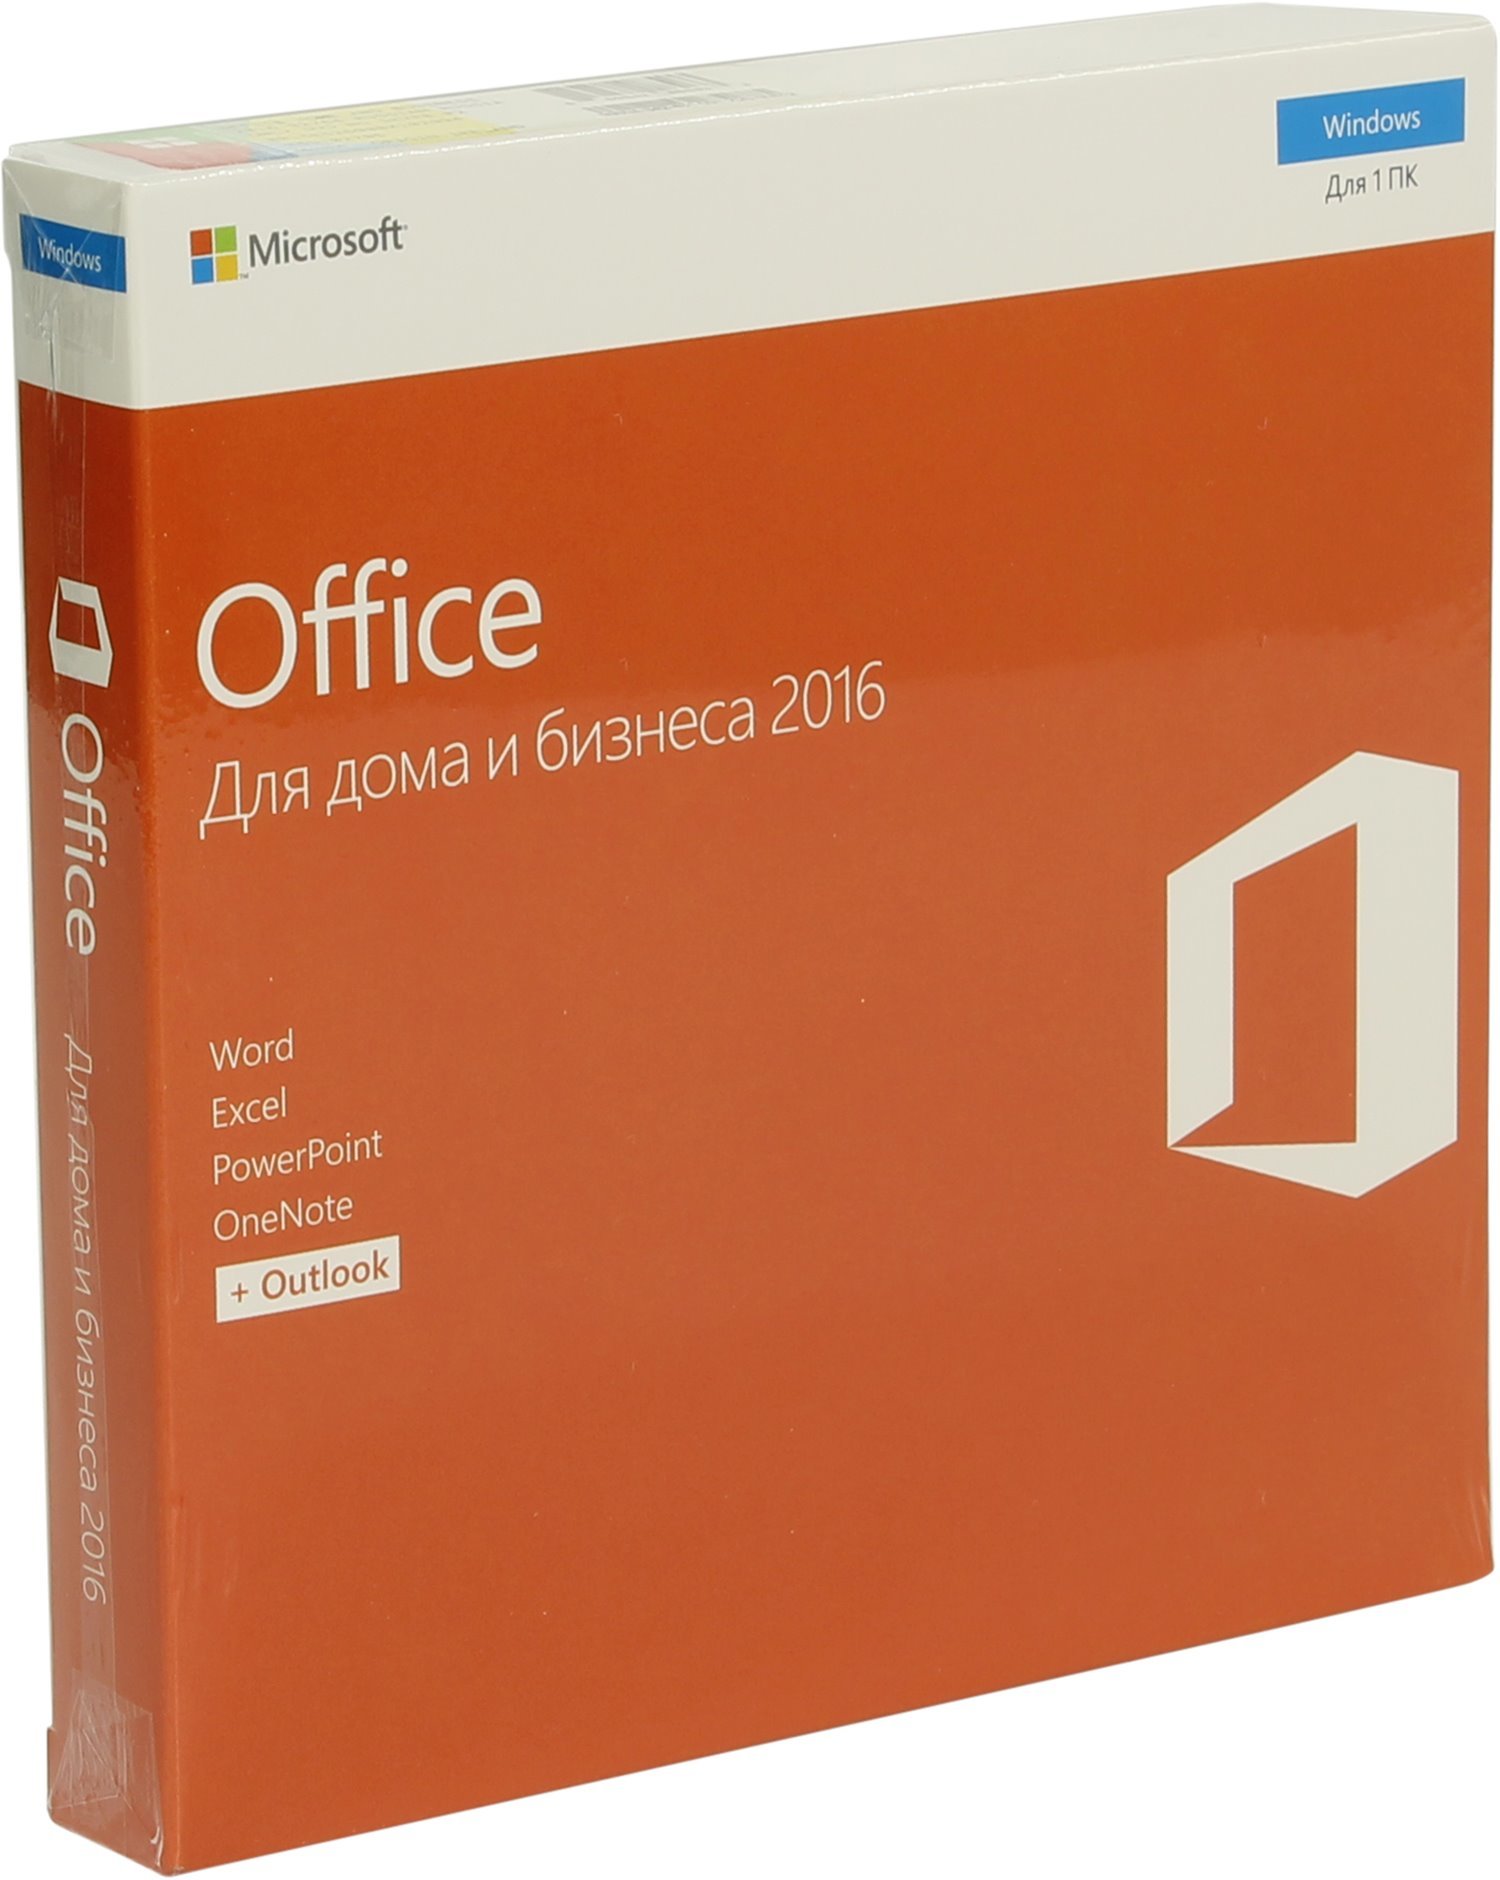 Microsoft Office 2016 Home and Business - 1 PC (All Languages) Электронная версия